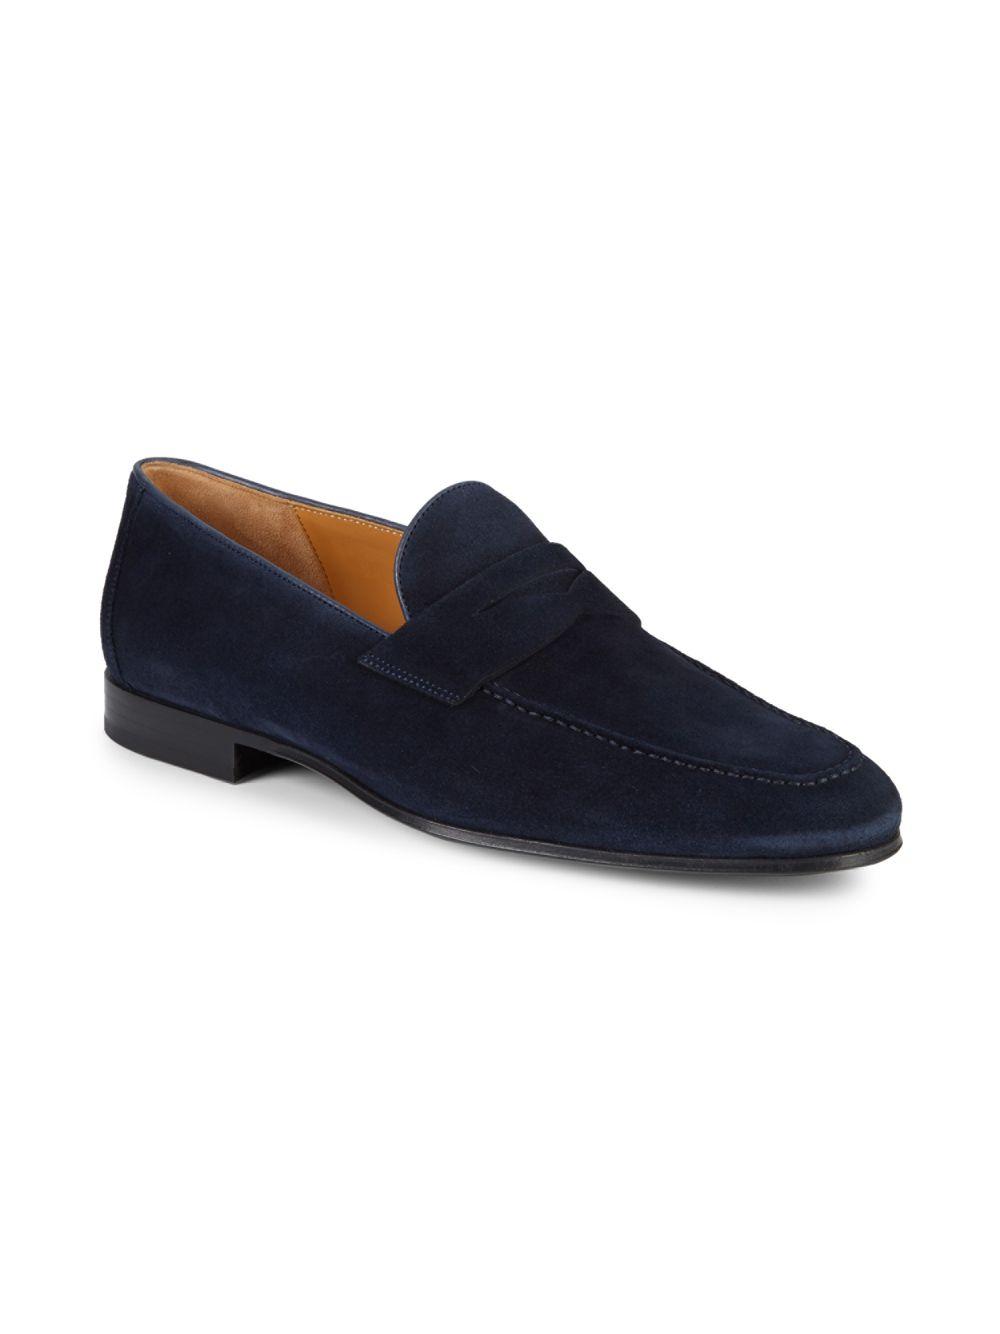 Magnanni Suede Penny Loafers in Navy (Blue) for Men - Lyst